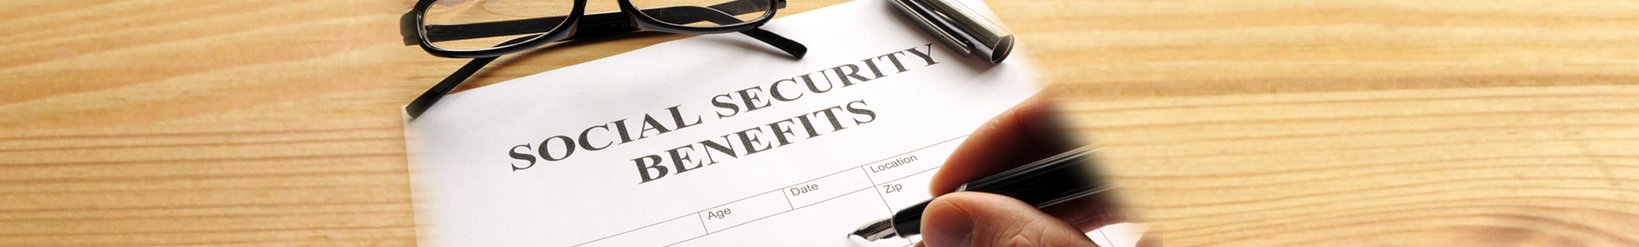 Social Security Disability Benefits for Multiple Sclerosis (Page 1)